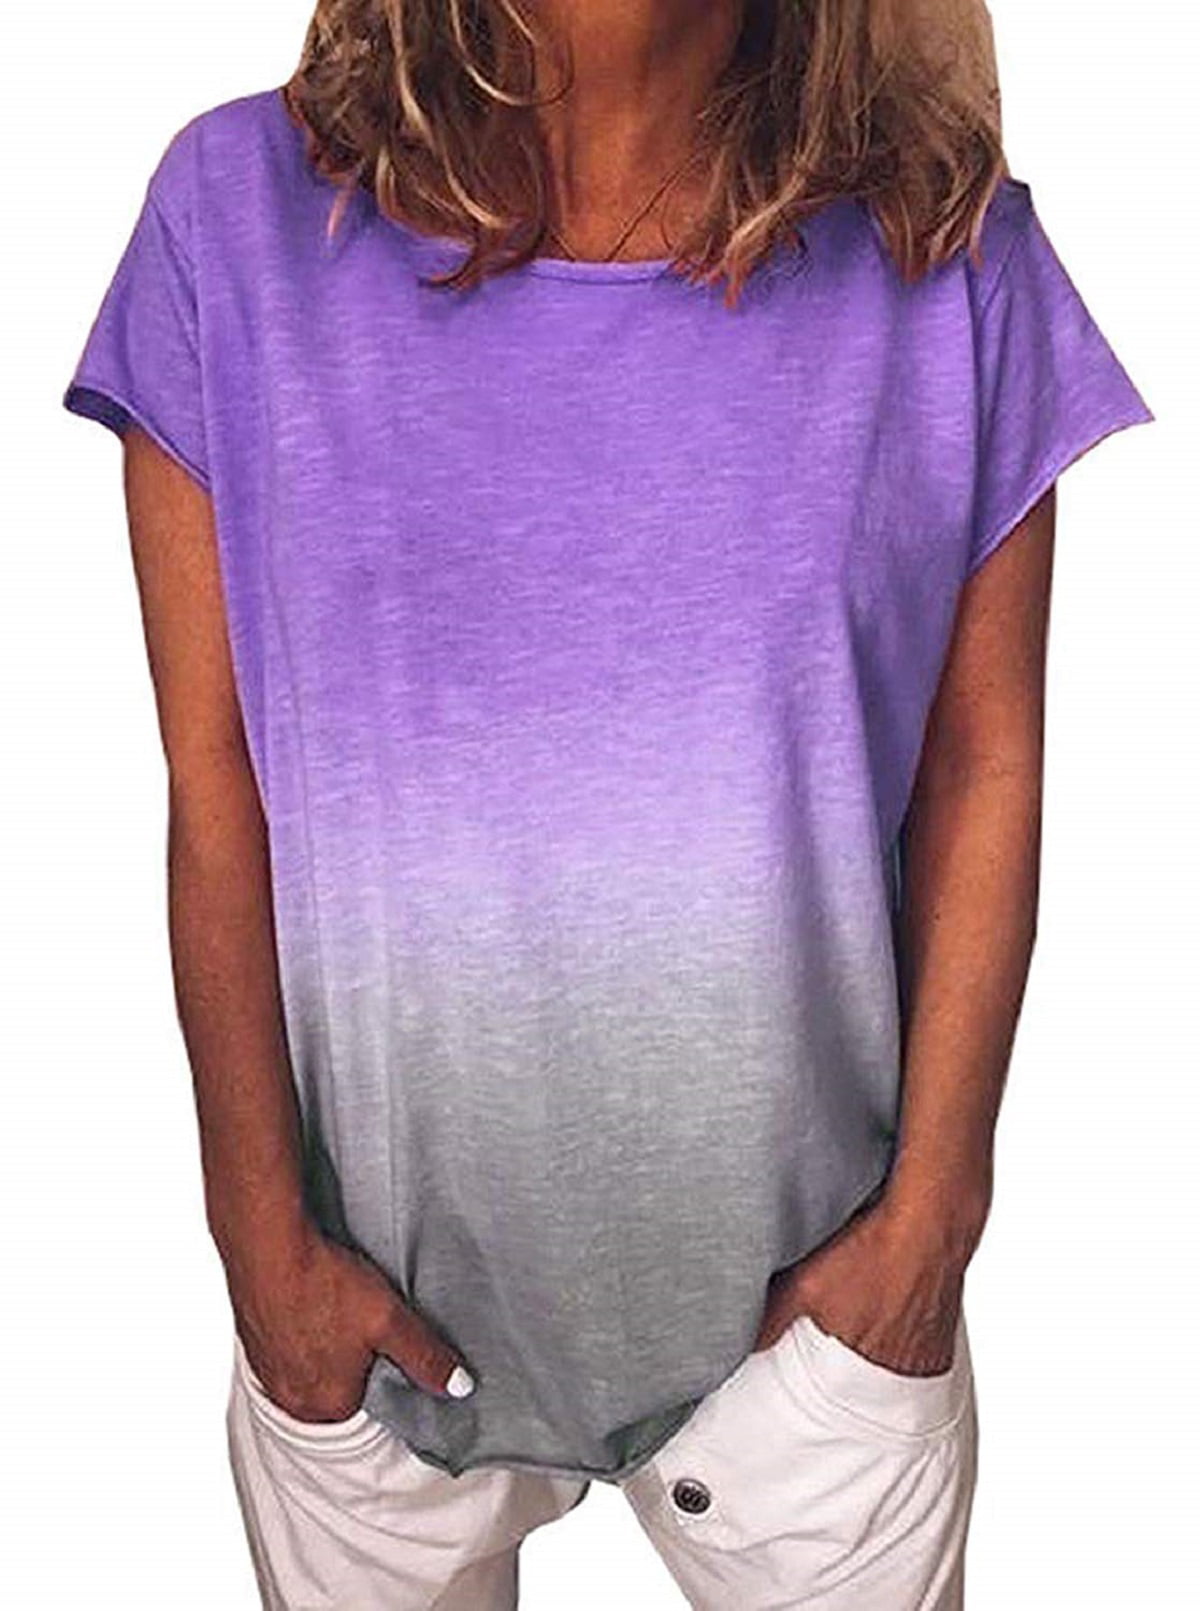 CREAM PURPLE LAVENDER OMBRE TIE DYED BOHO BELL SLEEVE CUTOUT SWEATER S M L 